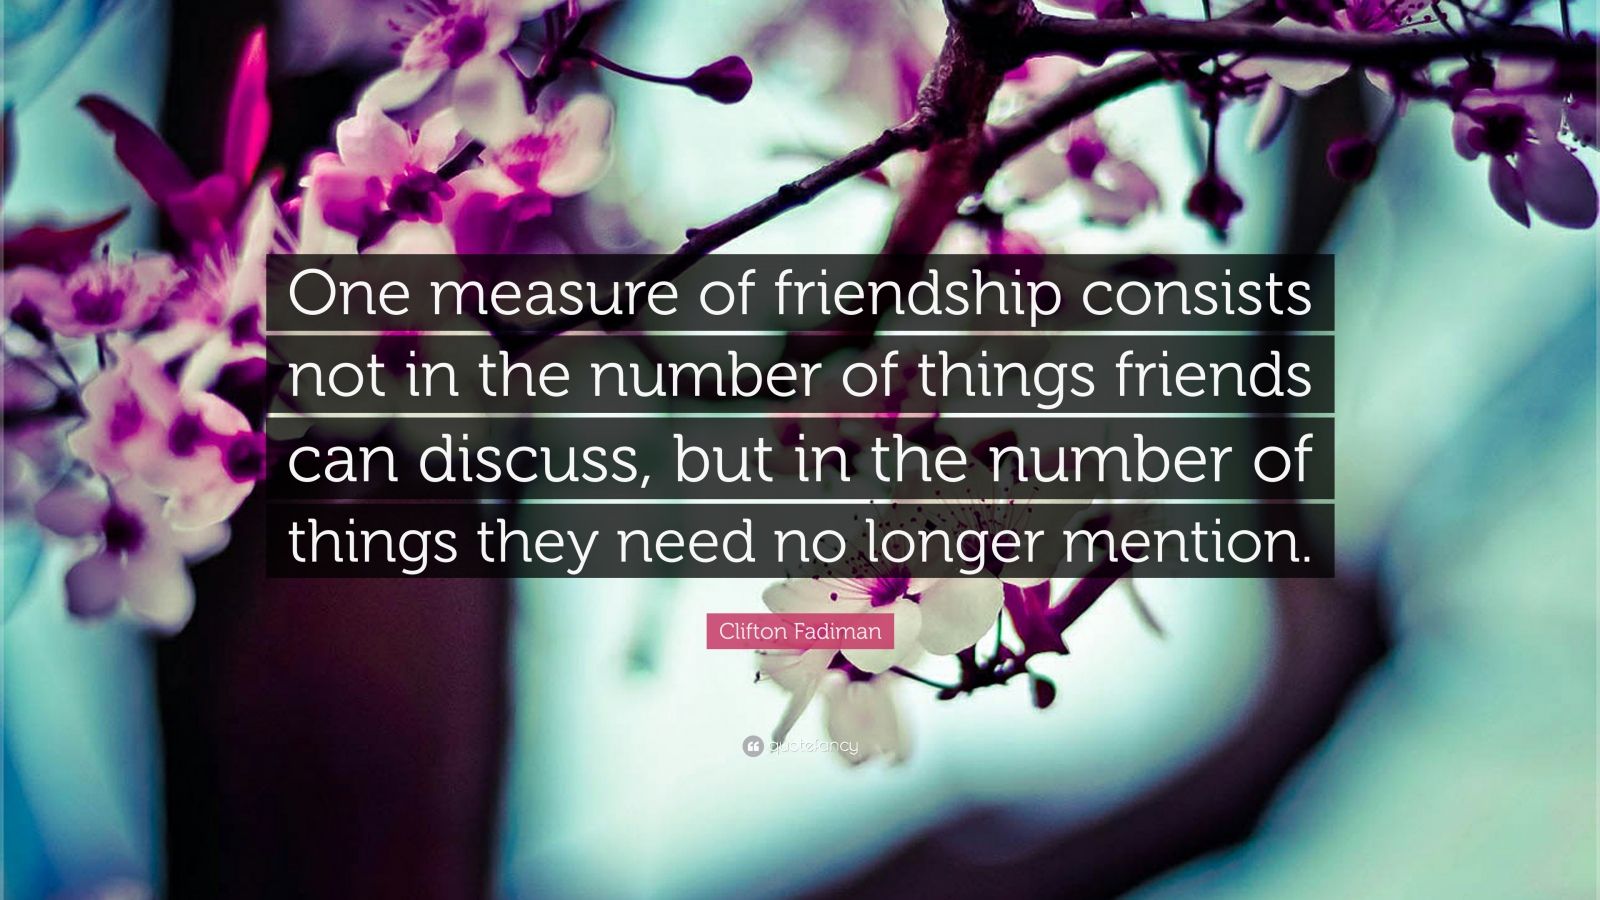 One measure of friendship consists not in the number of things friends can discuss, but in the number of things they need no longer mention.